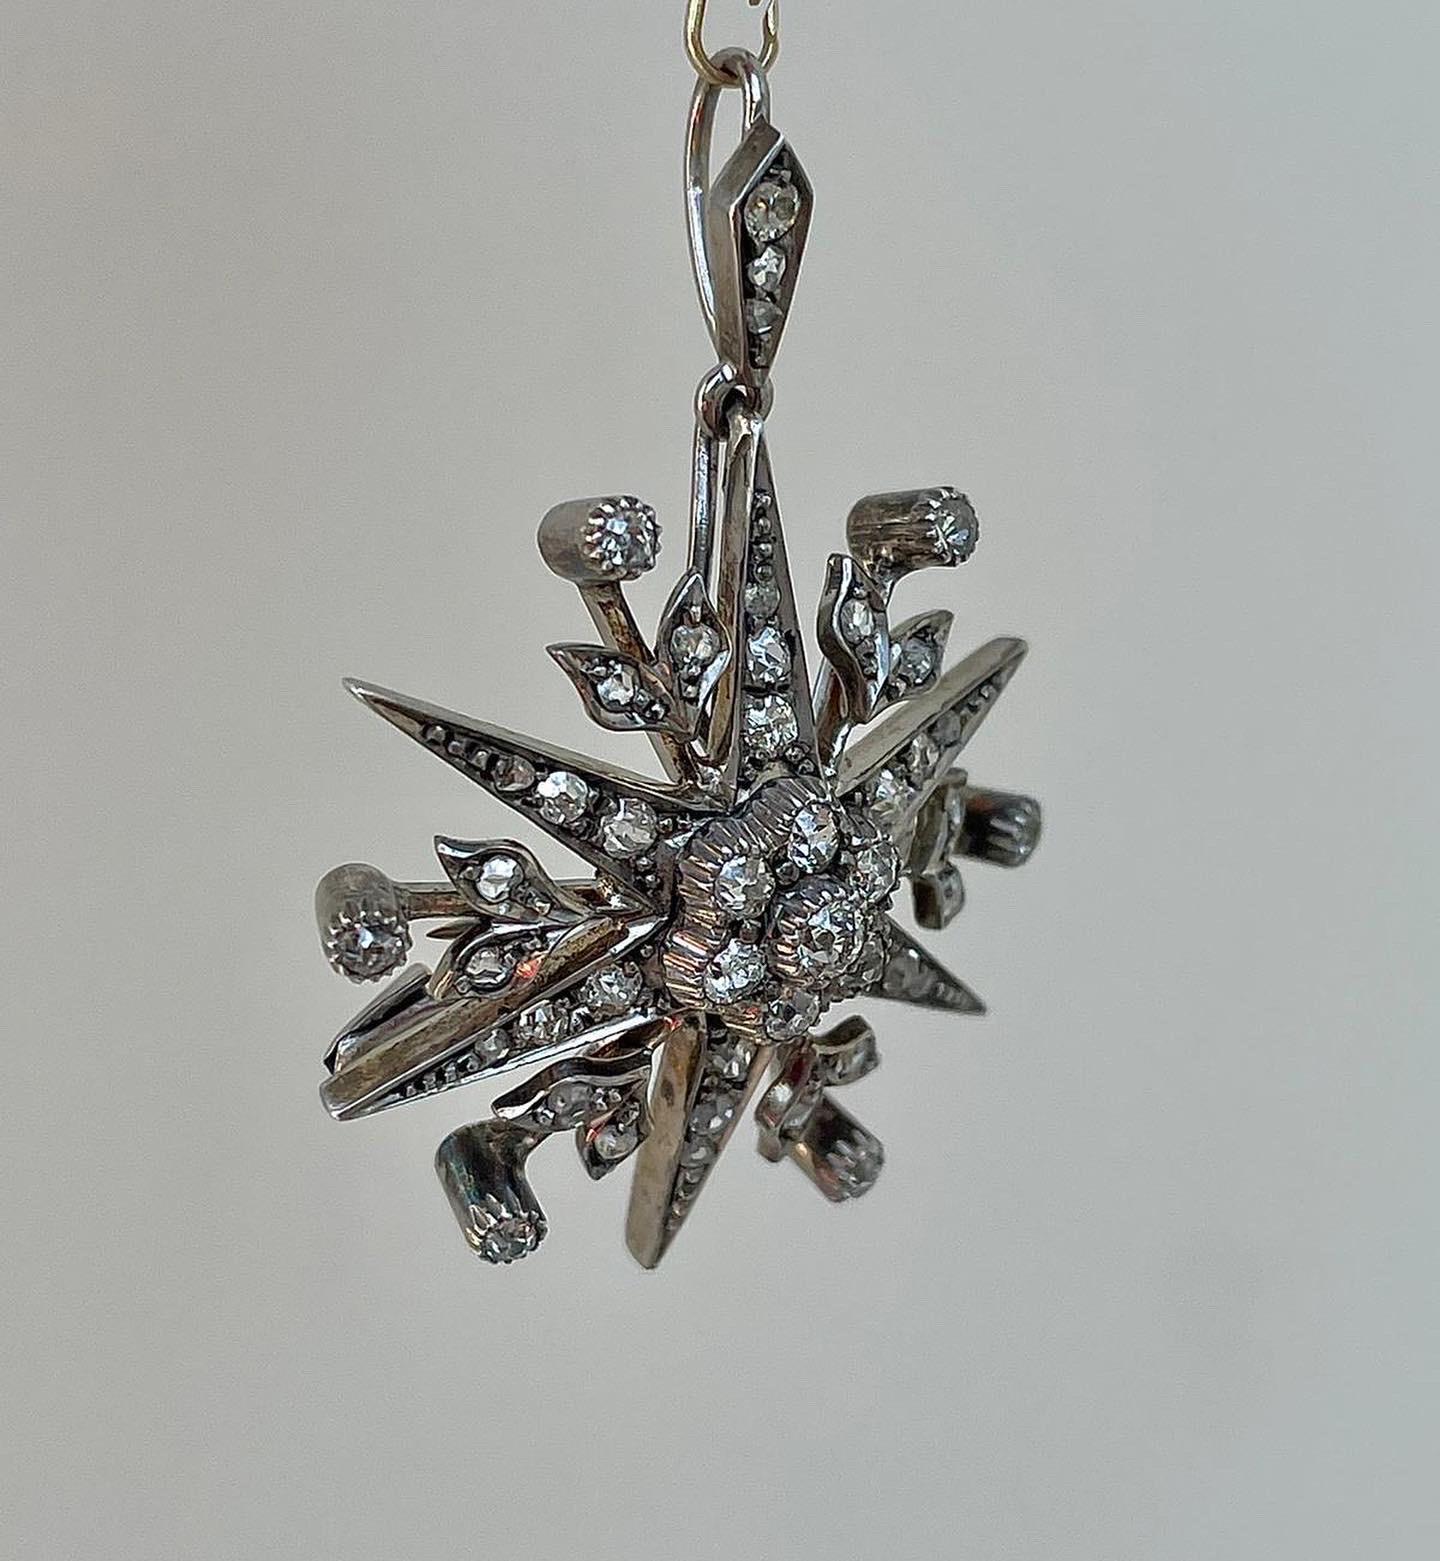 Delightful Antique Diamond Floral Starburst Pendant Brooch 18ct Yellow Gold & White Gold Setting



darling starburst brooch, she sparkles in the sunlight!



The item comes without the box in the photos but will be presented in gift box